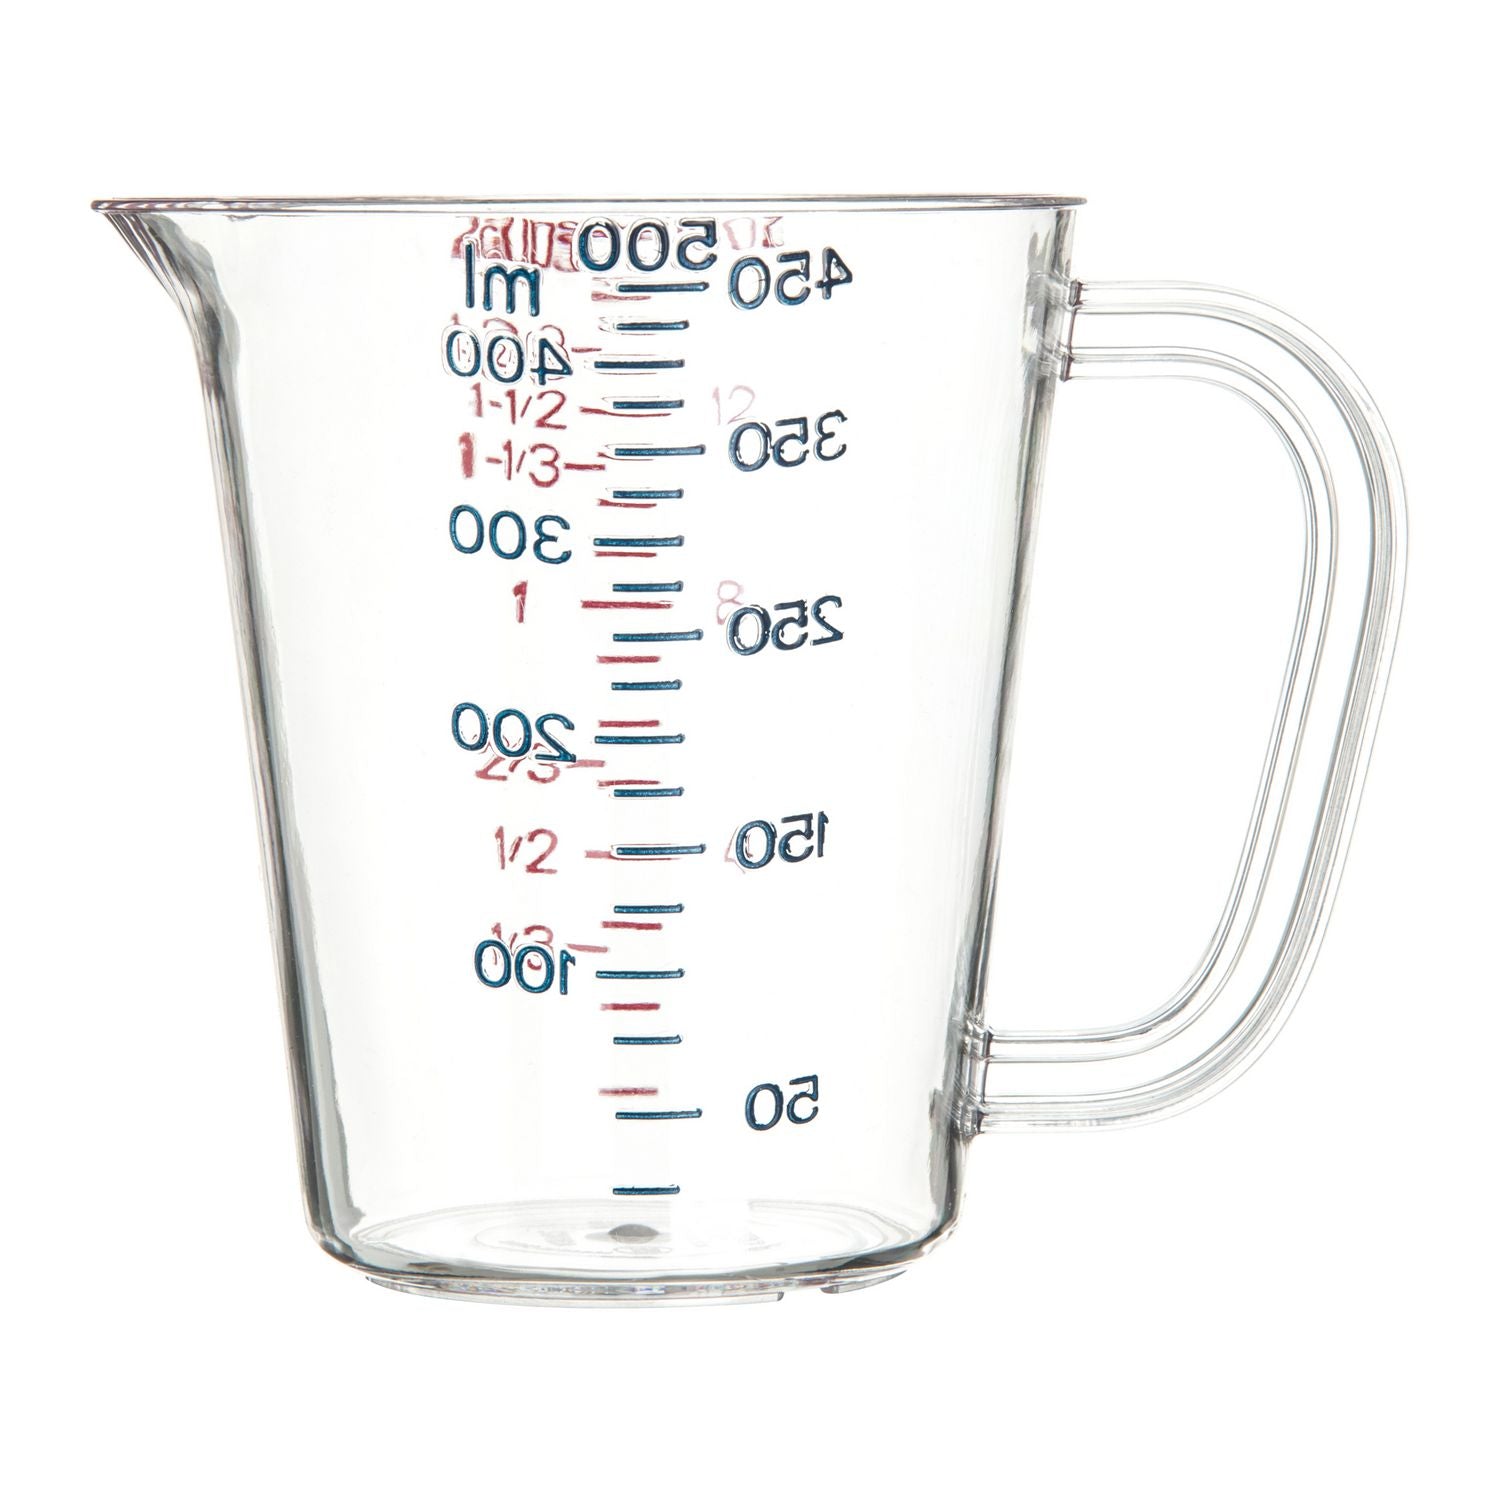 commercial-measuring-cup-1-pt-clear_cfs4314207 - 2